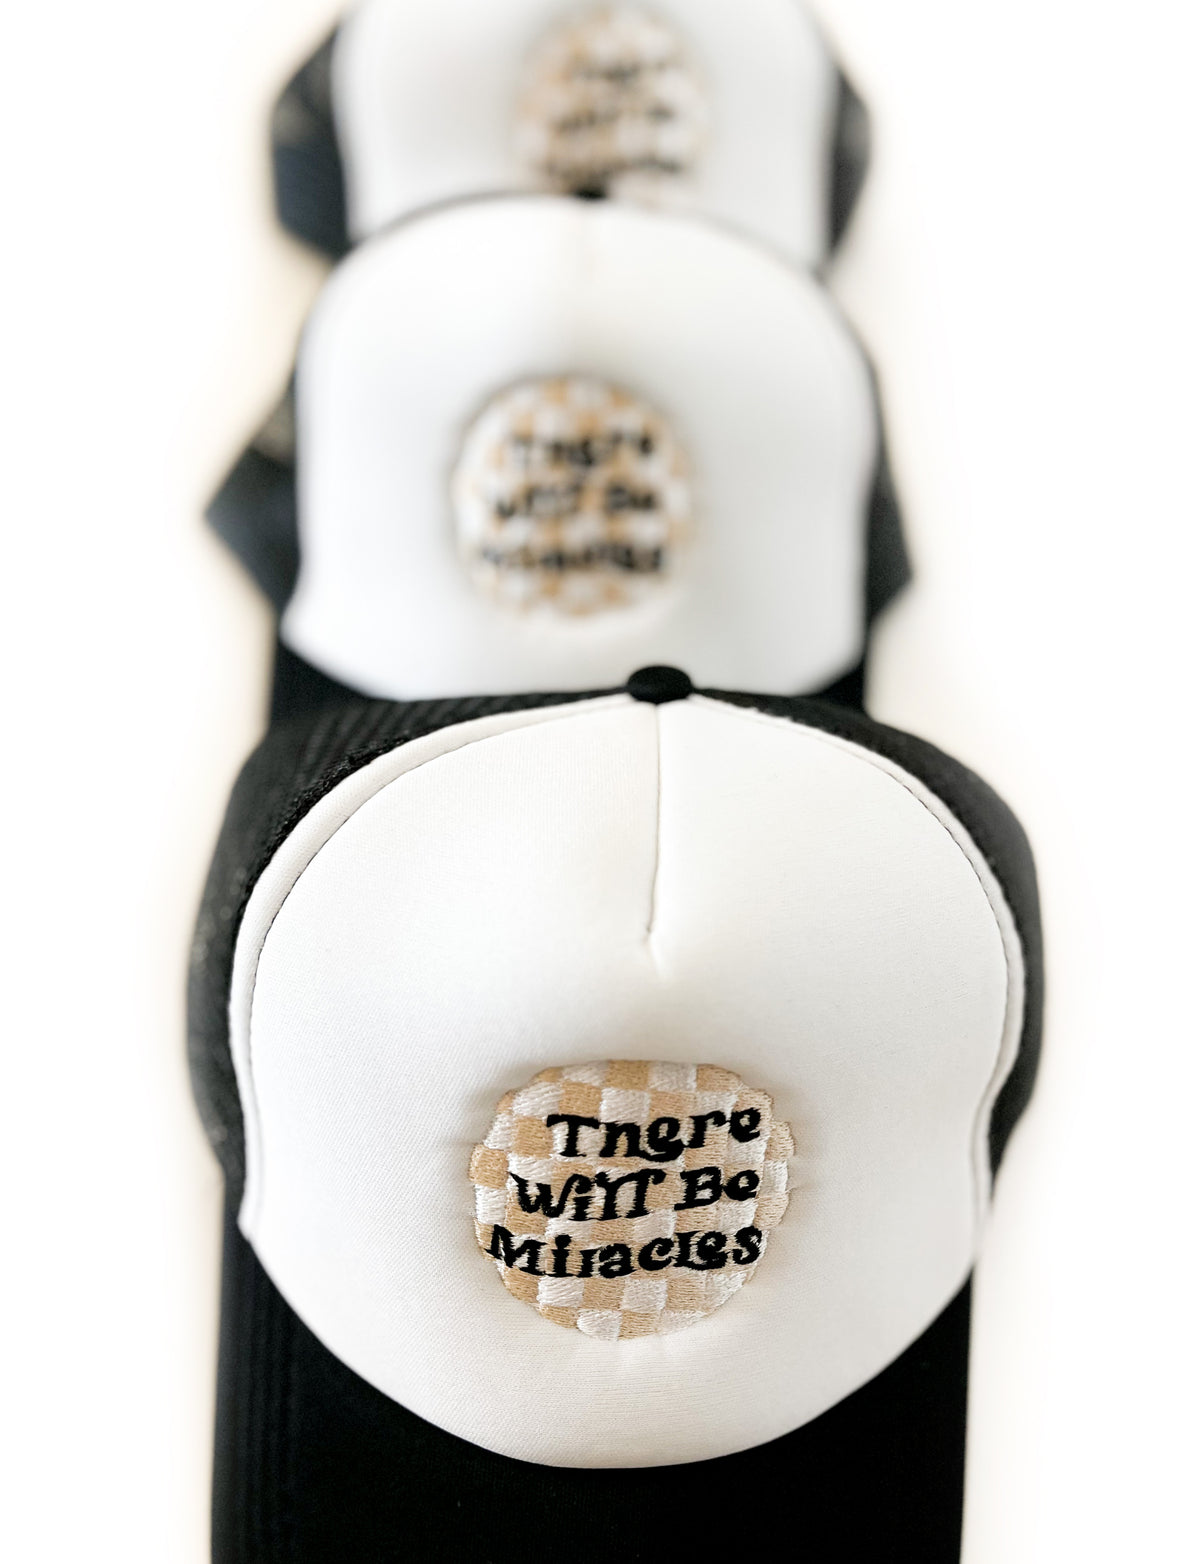 LAST CHANCE*** There Will Be Miracles Trucker Hat